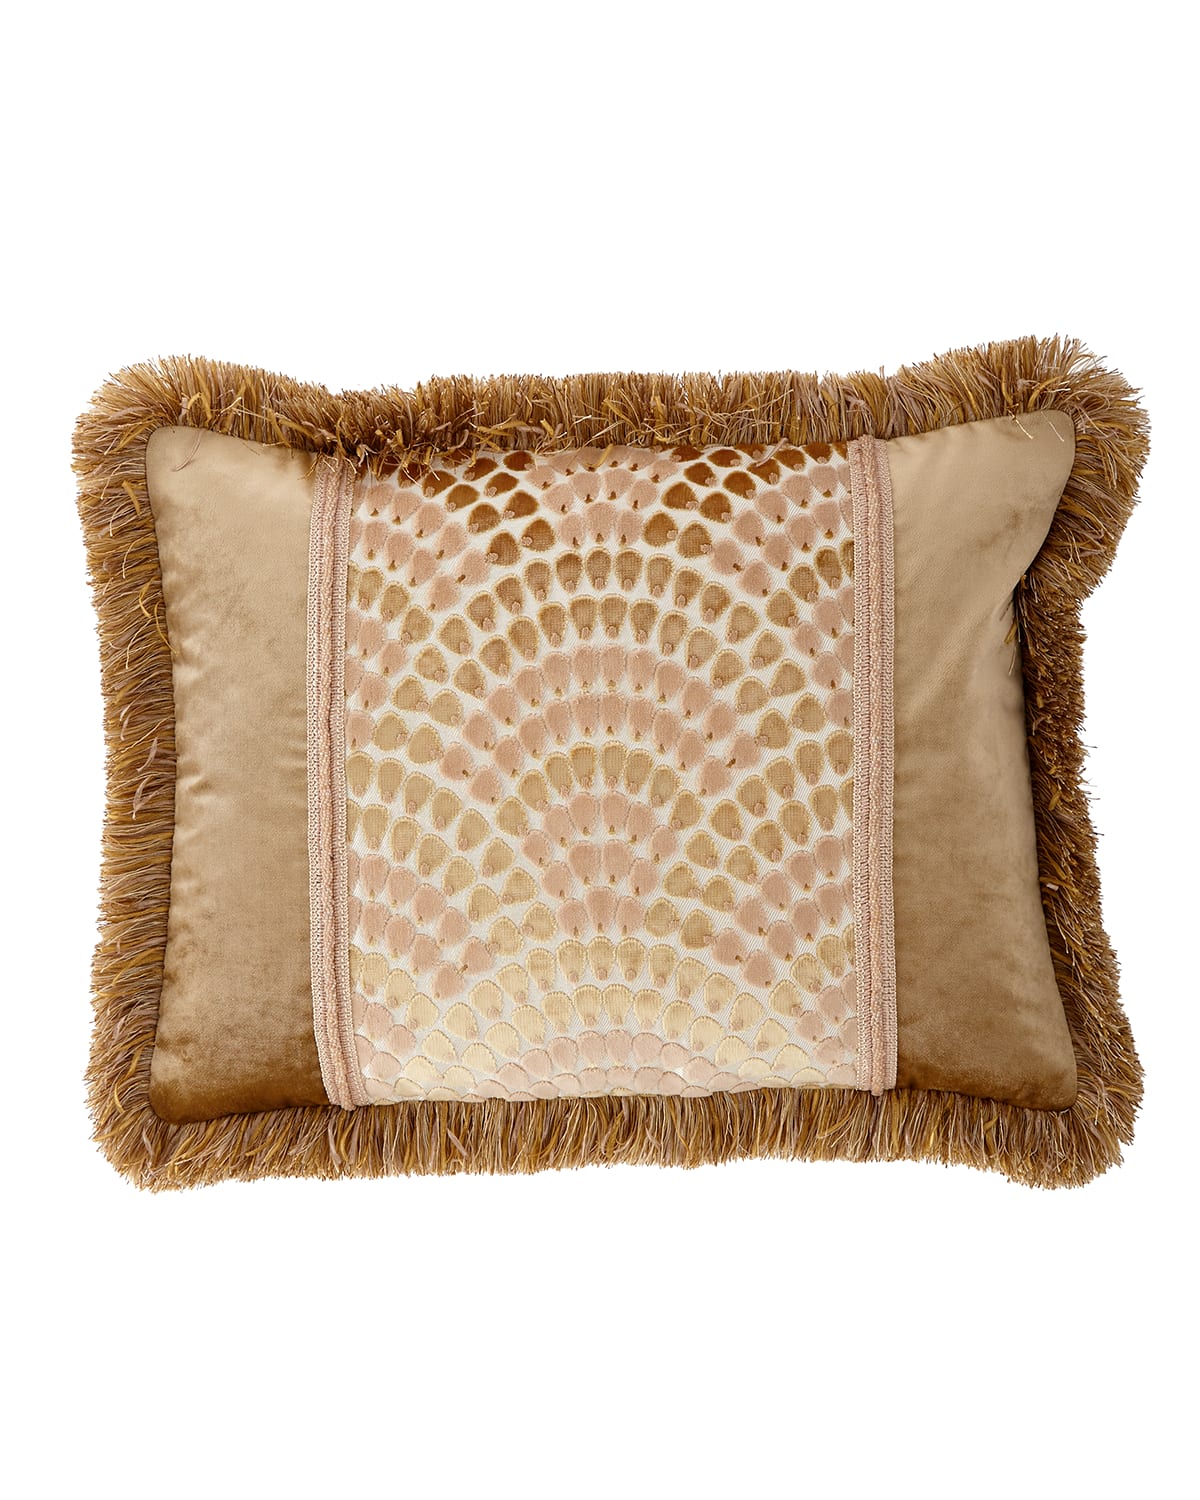 Image Dian Austin Couture Home Rosamaria Standard Sham with Fringe